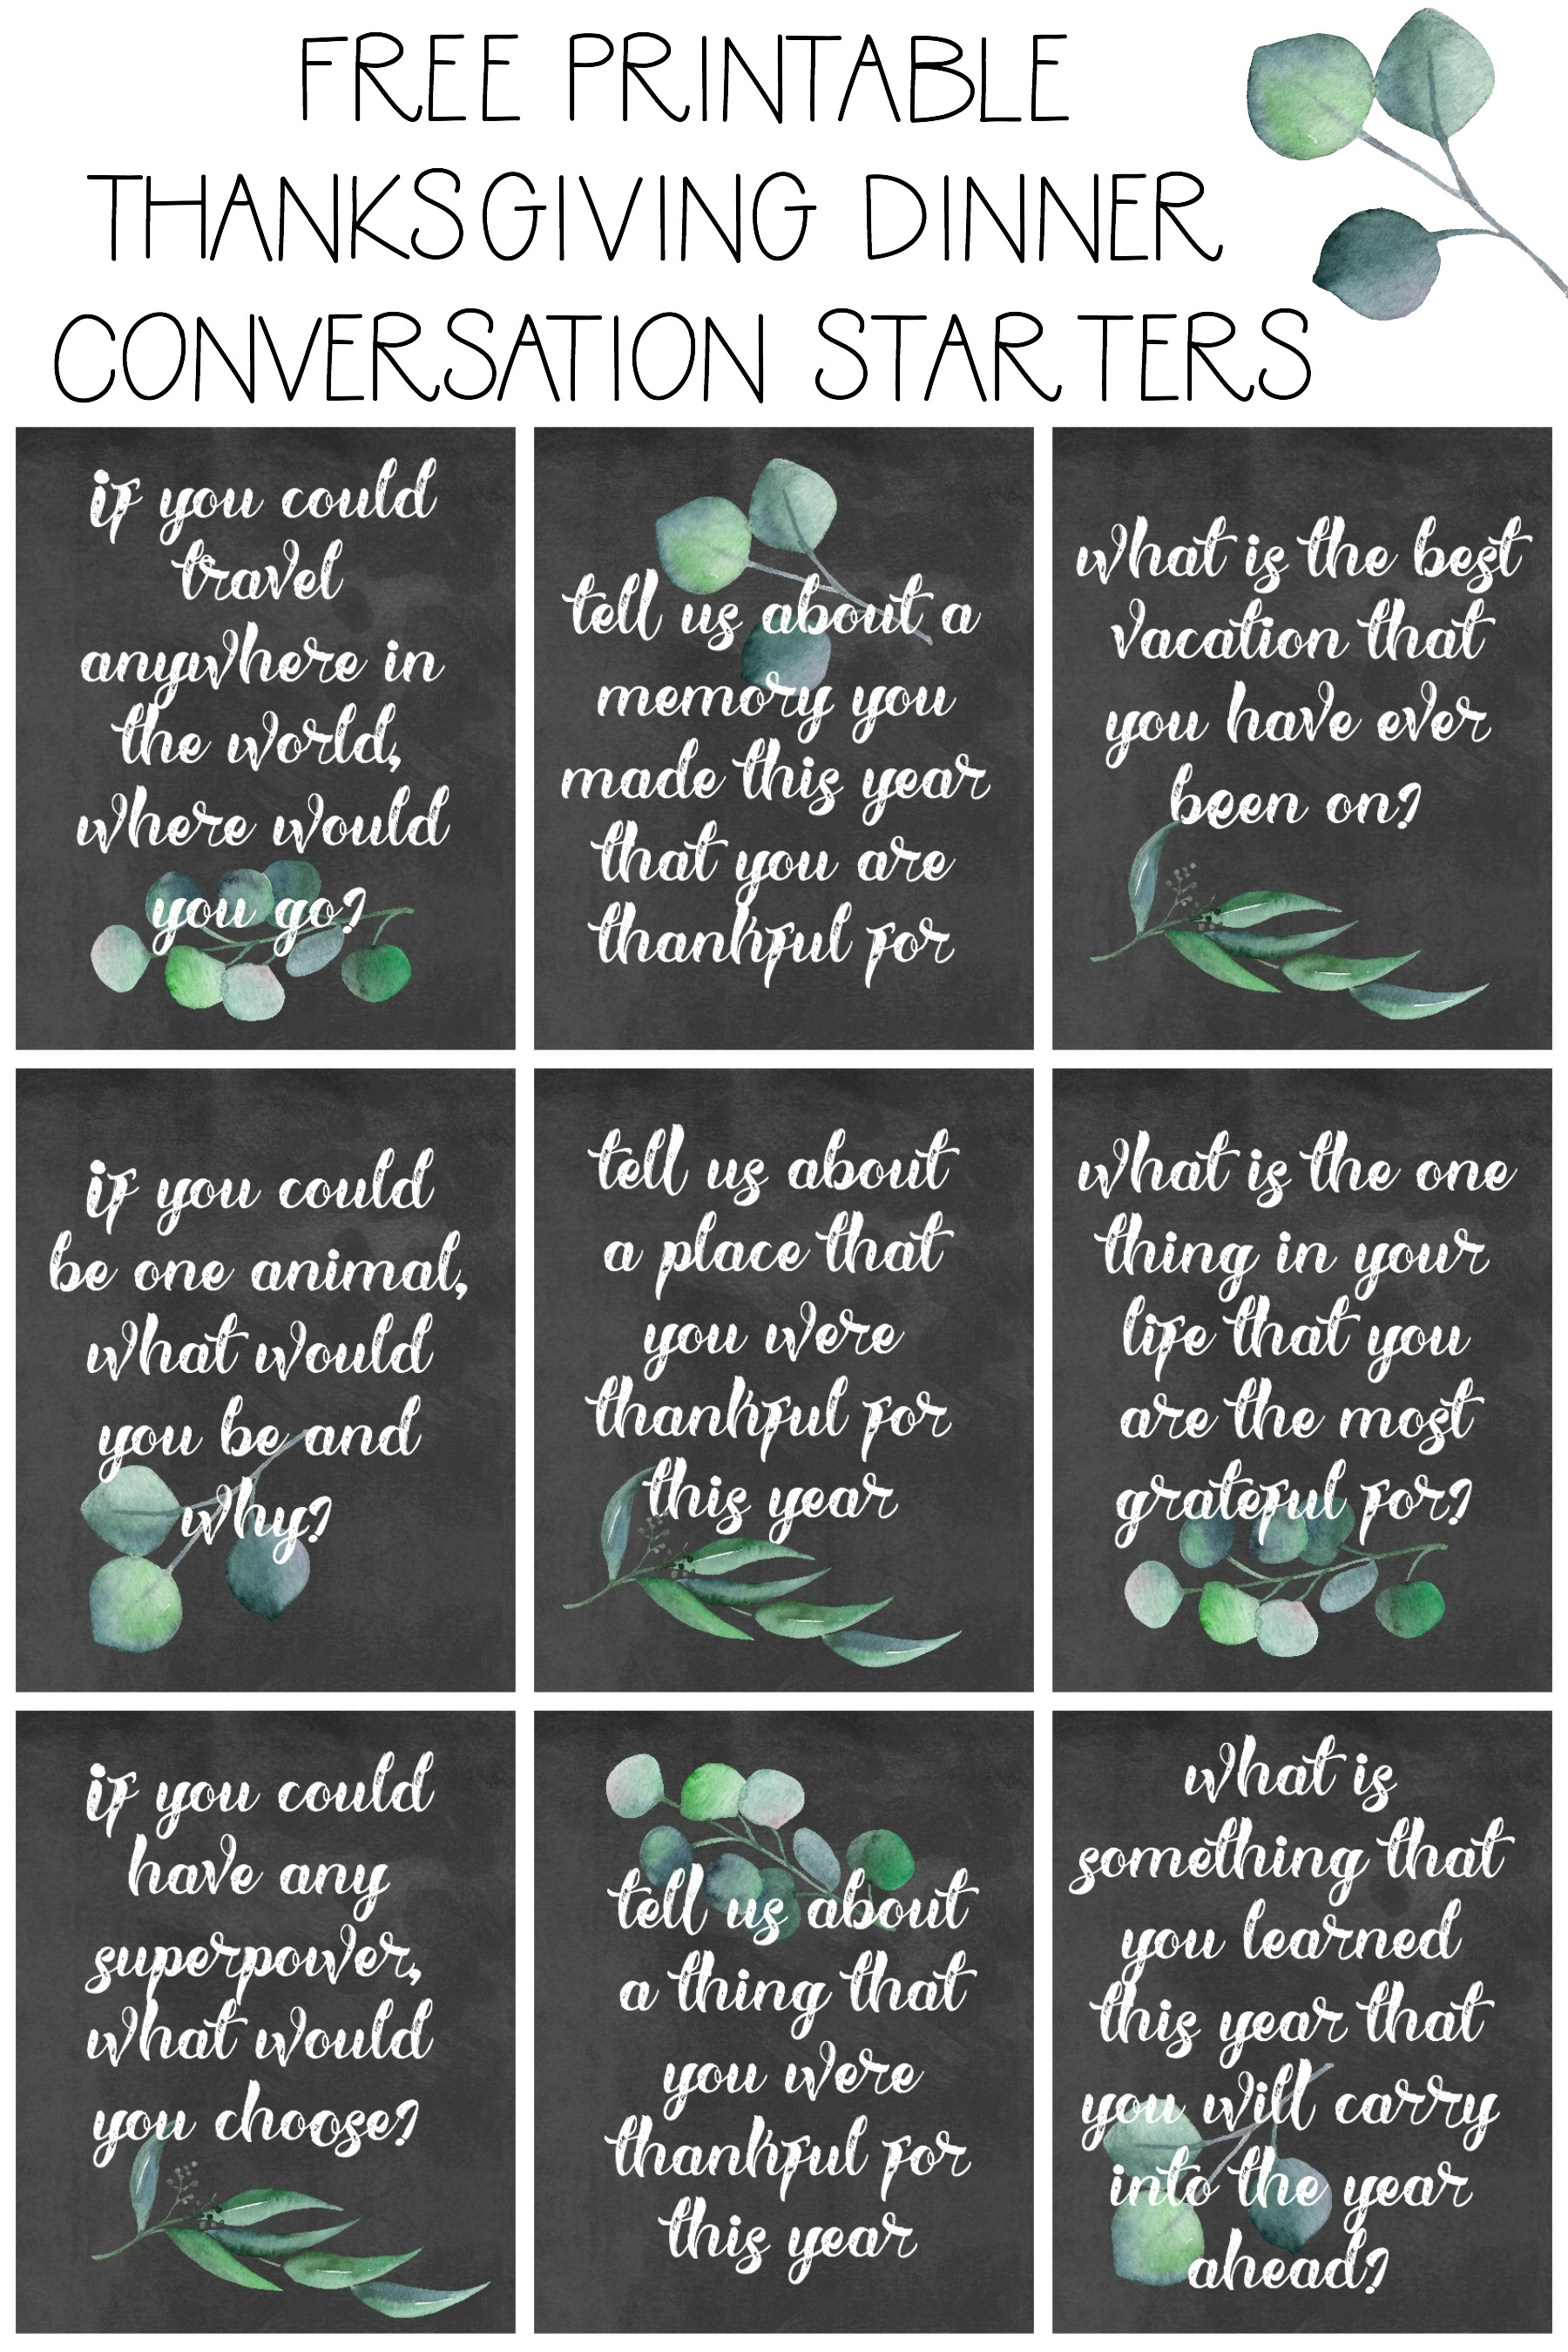 Thanksgiving Table Decor Ideas With Free Printable Thanksgiving Conversation Starters The Happy Housie